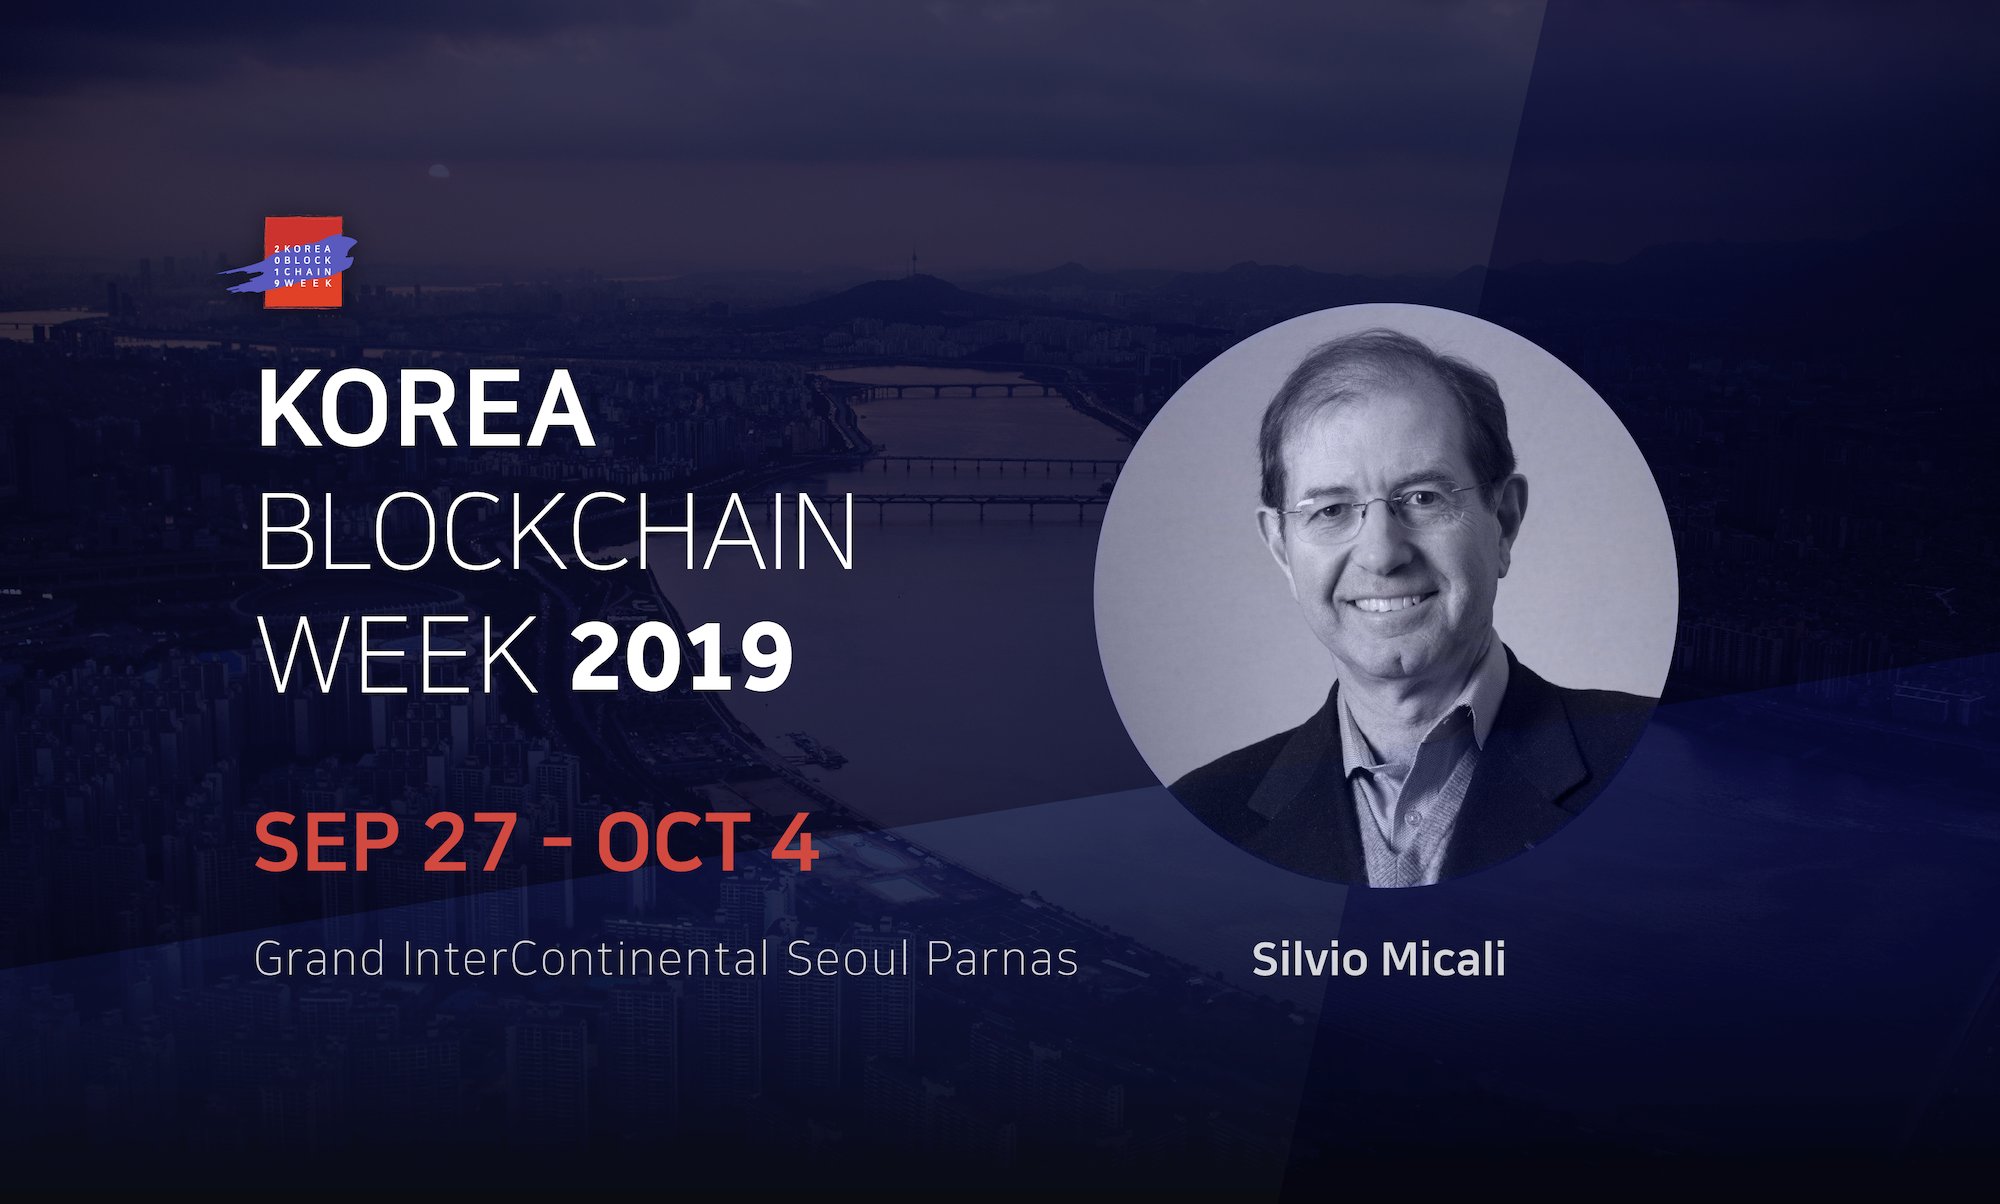 Turing Award Recipient, MIT Professor, and Founder of Algorand, Silvio Micali to Attend Asia’s Largest Blockchain Weekly Event, ‘Korea Blockchain Week 2019’